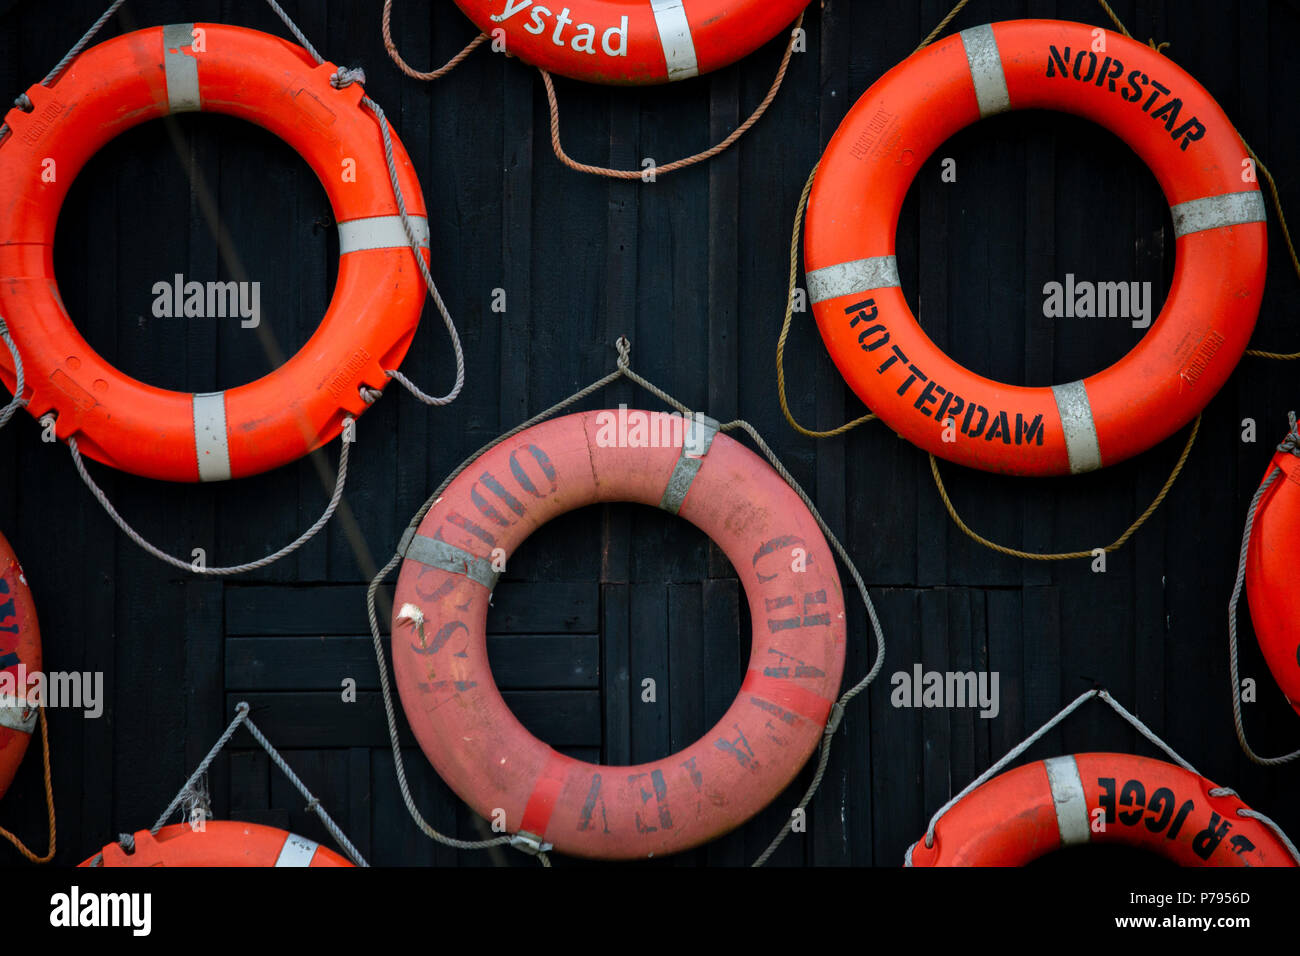 A collection of lifesavers on the side of the wall Stock Photo